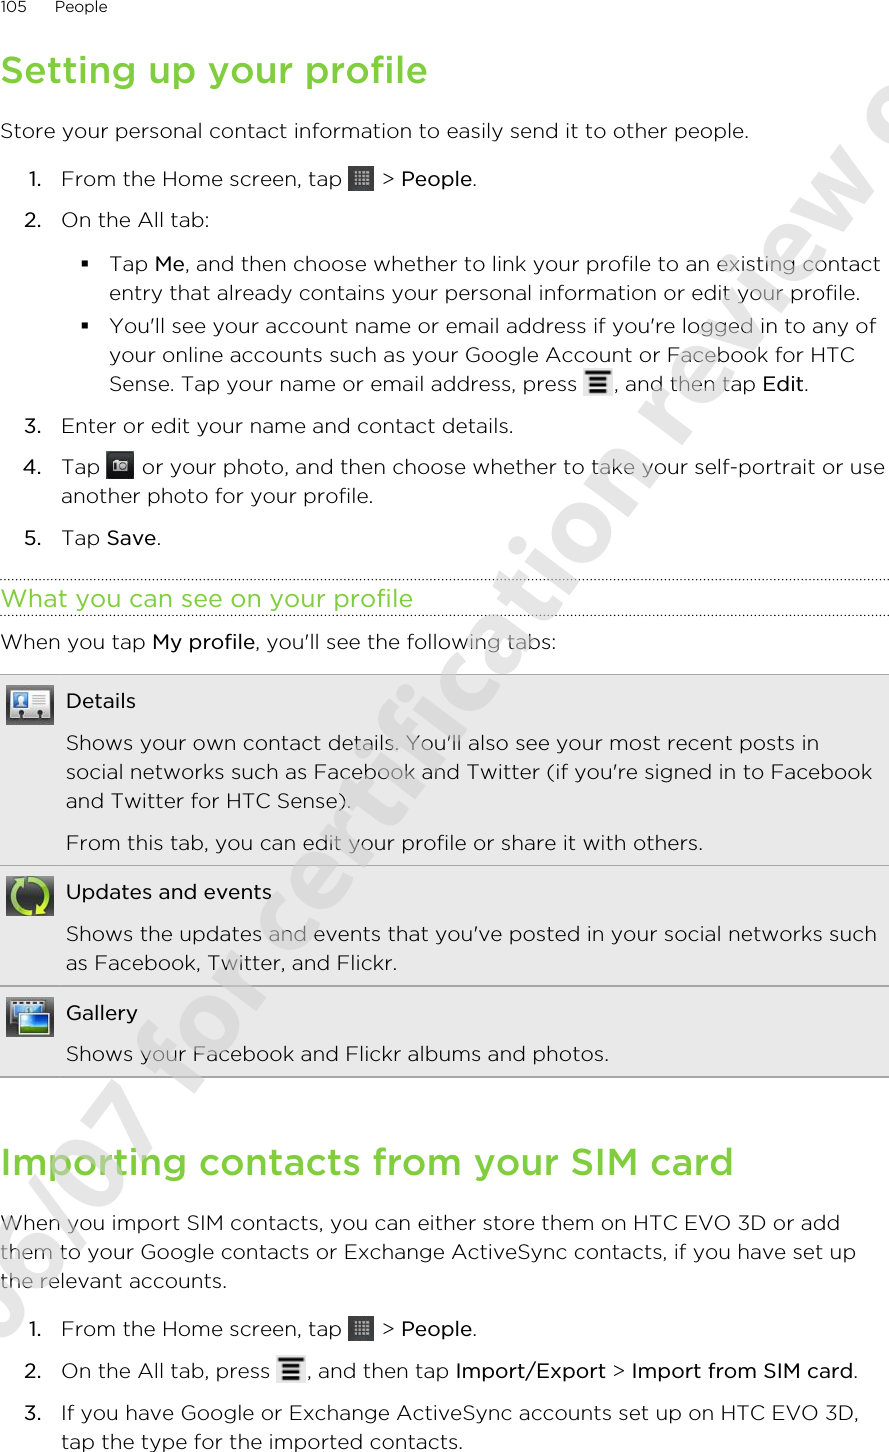 Setting up your profileStore your personal contact information to easily send it to other people.1. From the Home screen, tap   &gt; People.2. On the All tab:§Tap Me, and then choose whether to link your profile to an existing contactentry that already contains your personal information or edit your profile.§You&apos;ll see your account name or email address if you&apos;re logged in to any ofyour online accounts such as your Google Account or Facebook for HTCSense. Tap your name or email address, press  , and then tap Edit.3. Enter or edit your name and contact details.4. Tap   or your photo, and then choose whether to take your self-portrait or useanother photo for your profile.5. Tap Save.What you can see on your profileWhen you tap My profile, you&apos;ll see the following tabs:DetailsShows your own contact details. You&apos;ll also see your most recent posts insocial networks such as Facebook and Twitter (if you&apos;re signed in to Facebookand Twitter for HTC Sense).From this tab, you can edit your profile or share it with others.Updates and eventsShows the updates and events that you&apos;ve posted in your social networks suchas Facebook, Twitter, and Flickr.GalleryShows your Facebook and Flickr albums and photos.Importing contacts from your SIM cardWhen you import SIM contacts, you can either store them on HTC EVO 3D or addthem to your Google contacts or Exchange ActiveSync contacts, if you have set upthe relevant accounts.1. From the Home screen, tap   &gt; People.2. On the All tab, press  , and then tap Import/Export &gt; Import from SIM card.3. If you have Google or Exchange ActiveSync accounts set up on HTC EVO 3D,tap the type for the imported contacts.105 People2011/06/07 for certification review only